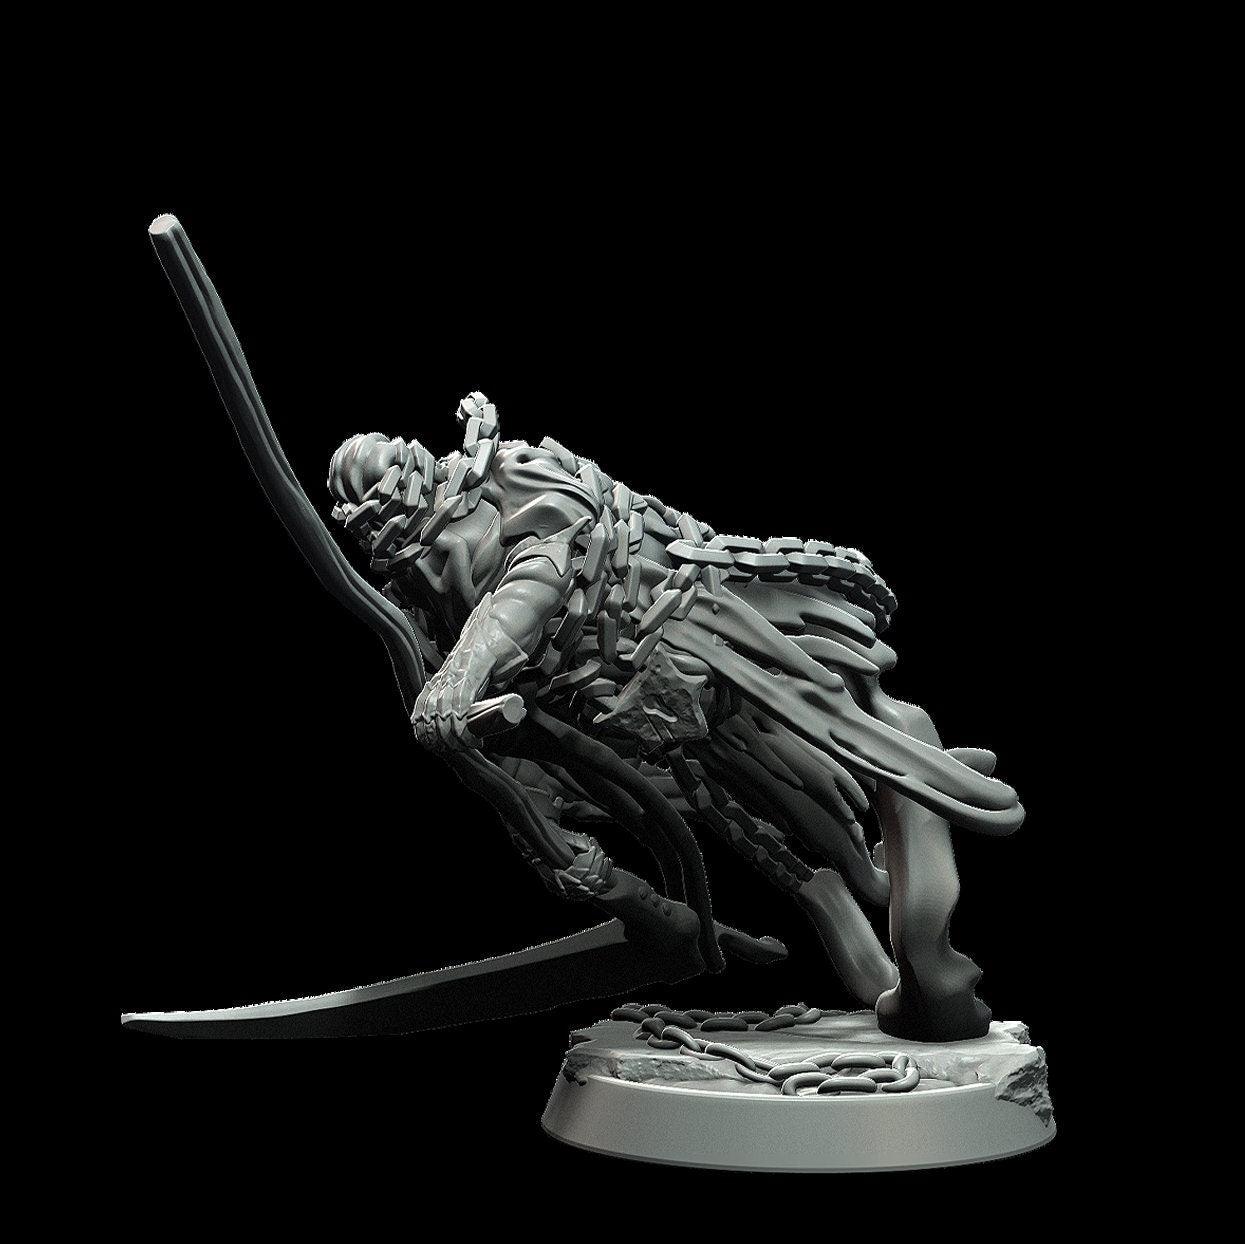 Imprisoned Soul Miniature skeleton miniature - 3 Poses - 28mm scale Tabletop gaming DnD Miniature Dungeons and Dragons dnd 5e - Plague Miniatures shop for DnD Miniatures